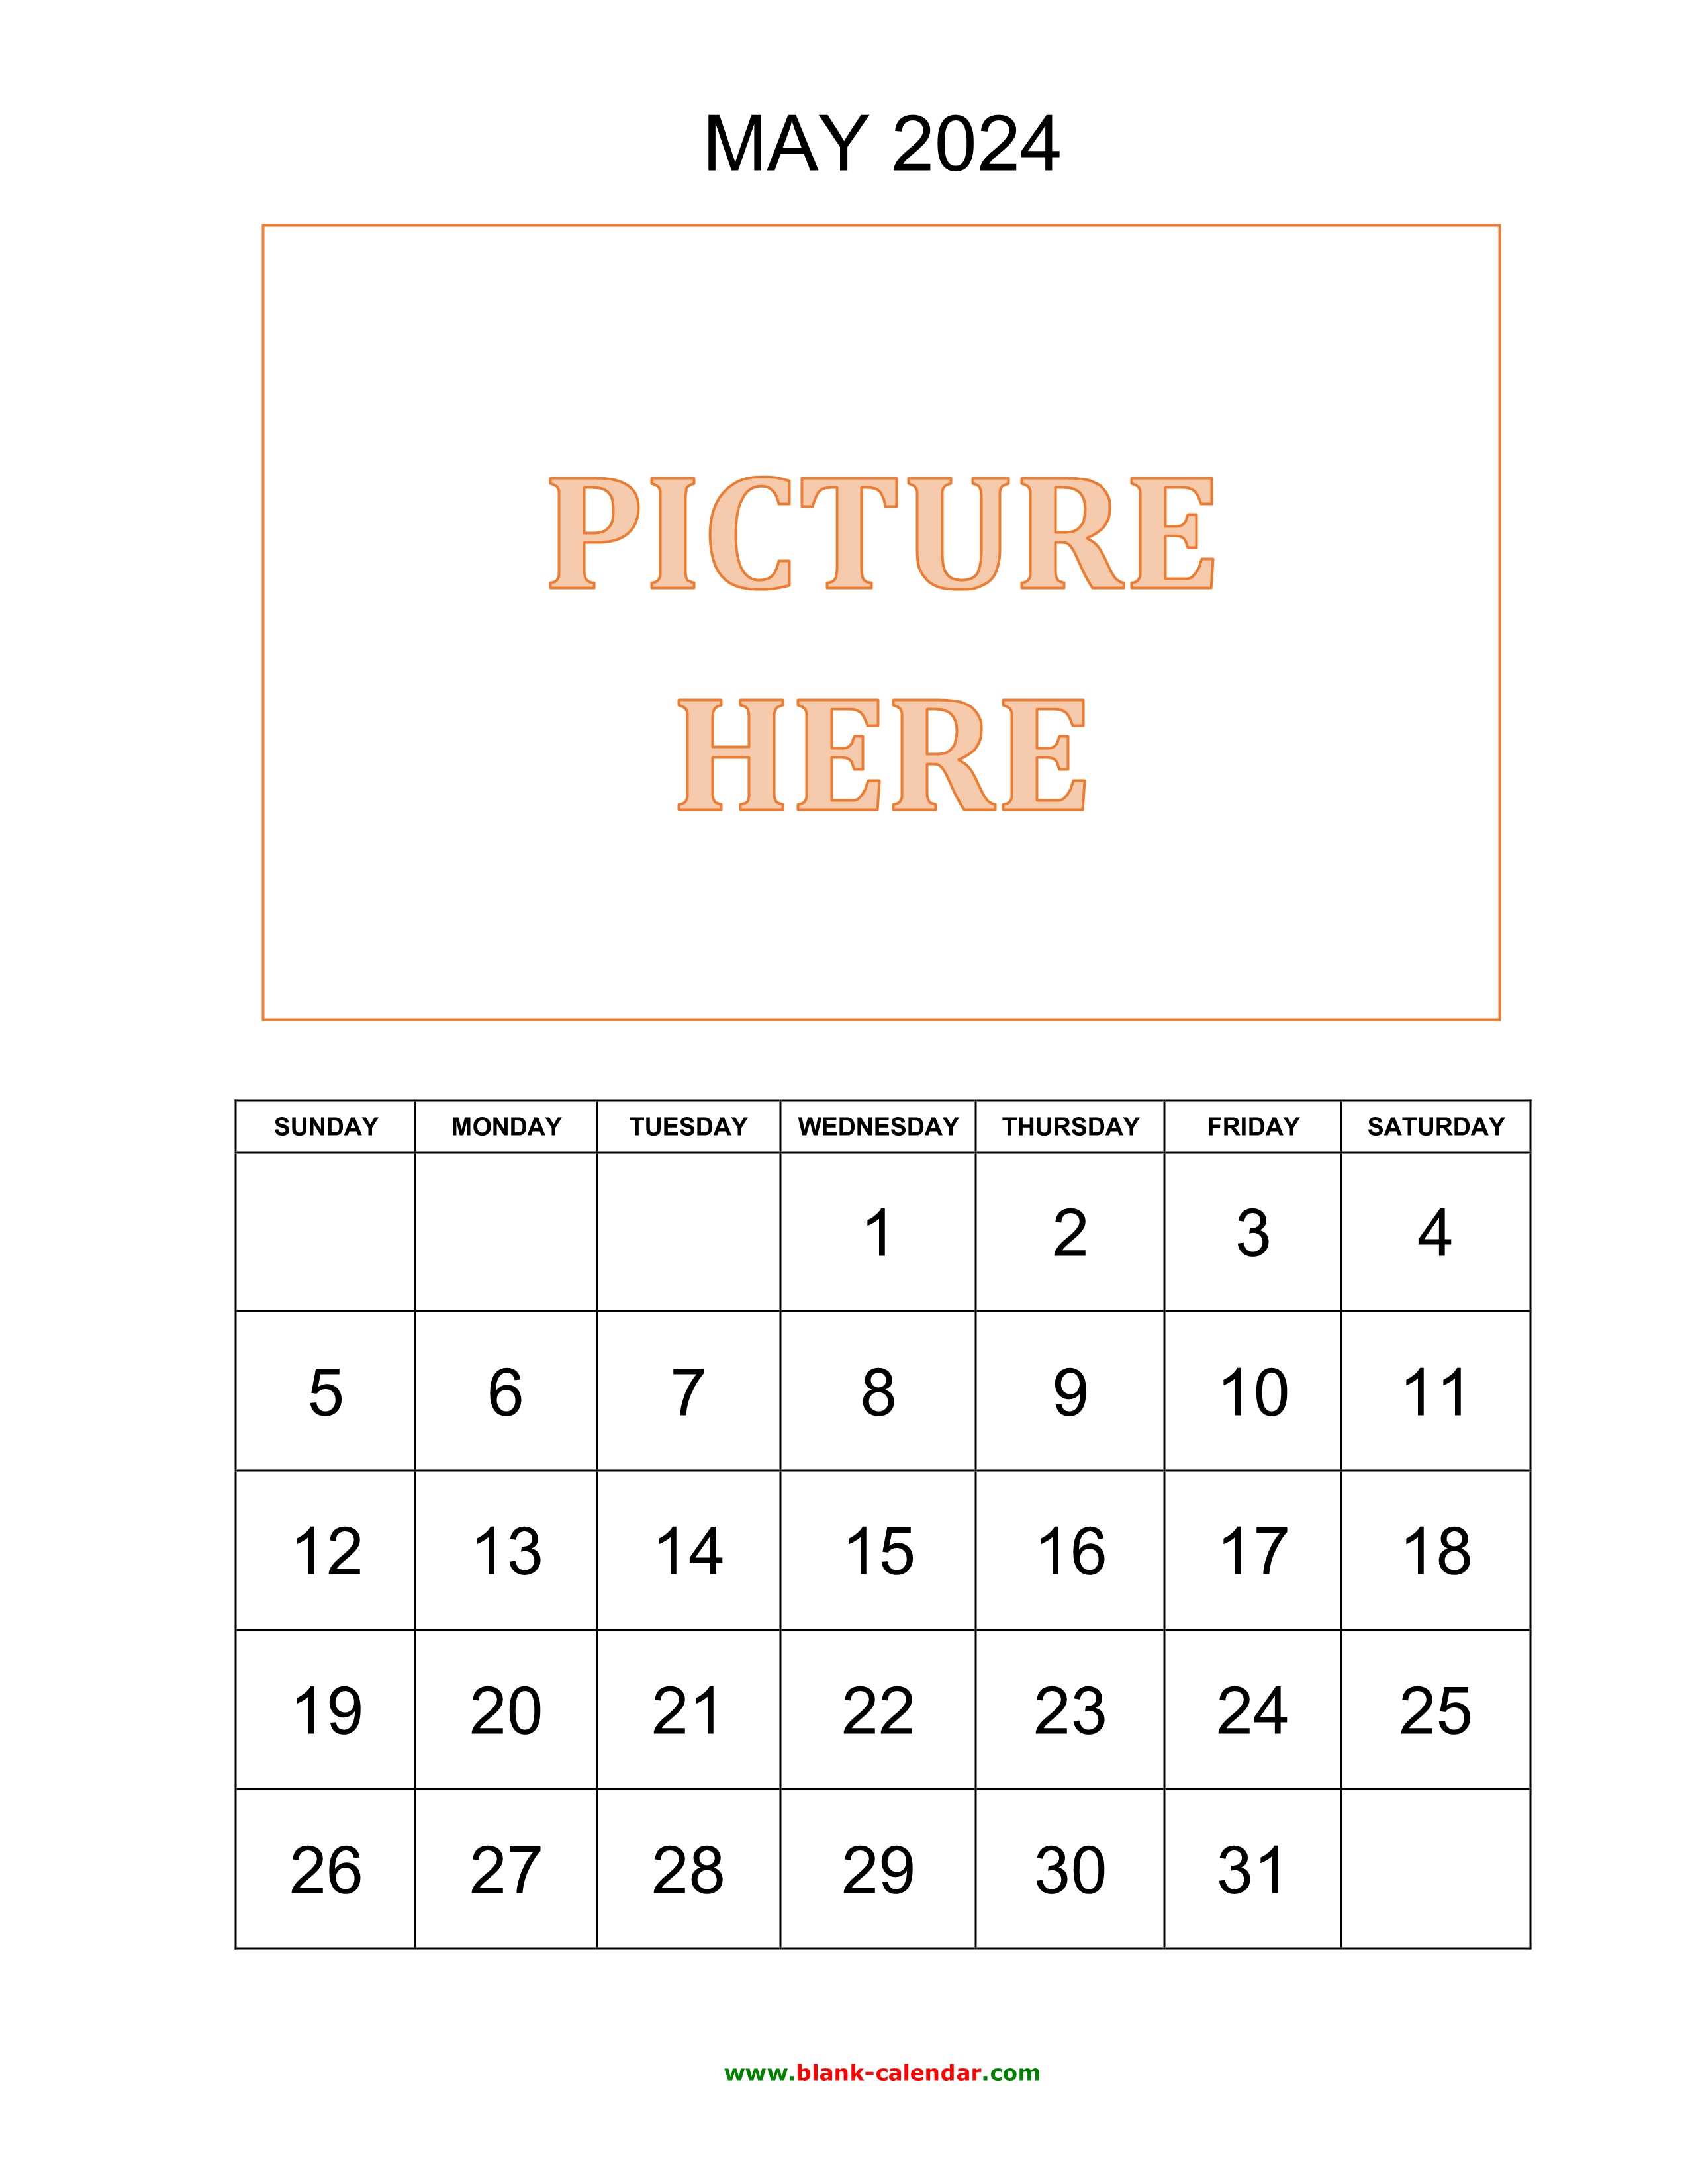 Free Download Printable May 2024 Calendar, pictures can be placed at